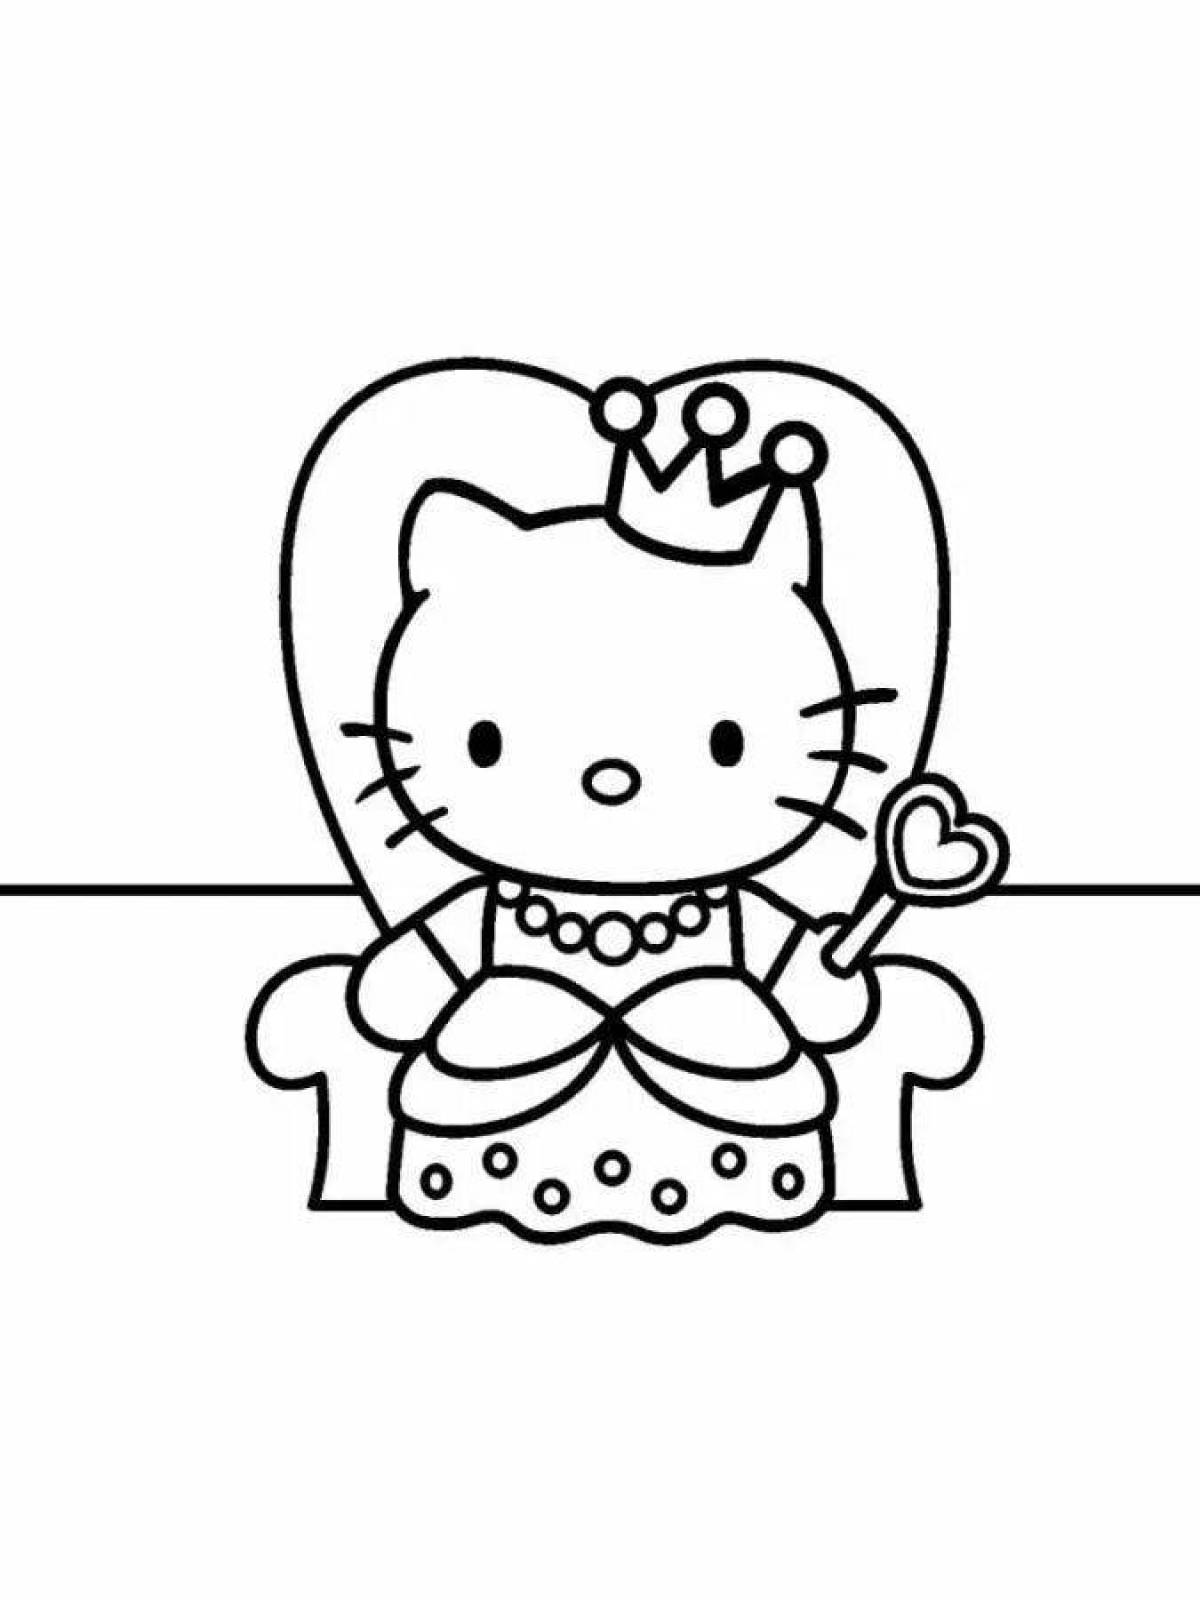 Exciting hello kitty drawing